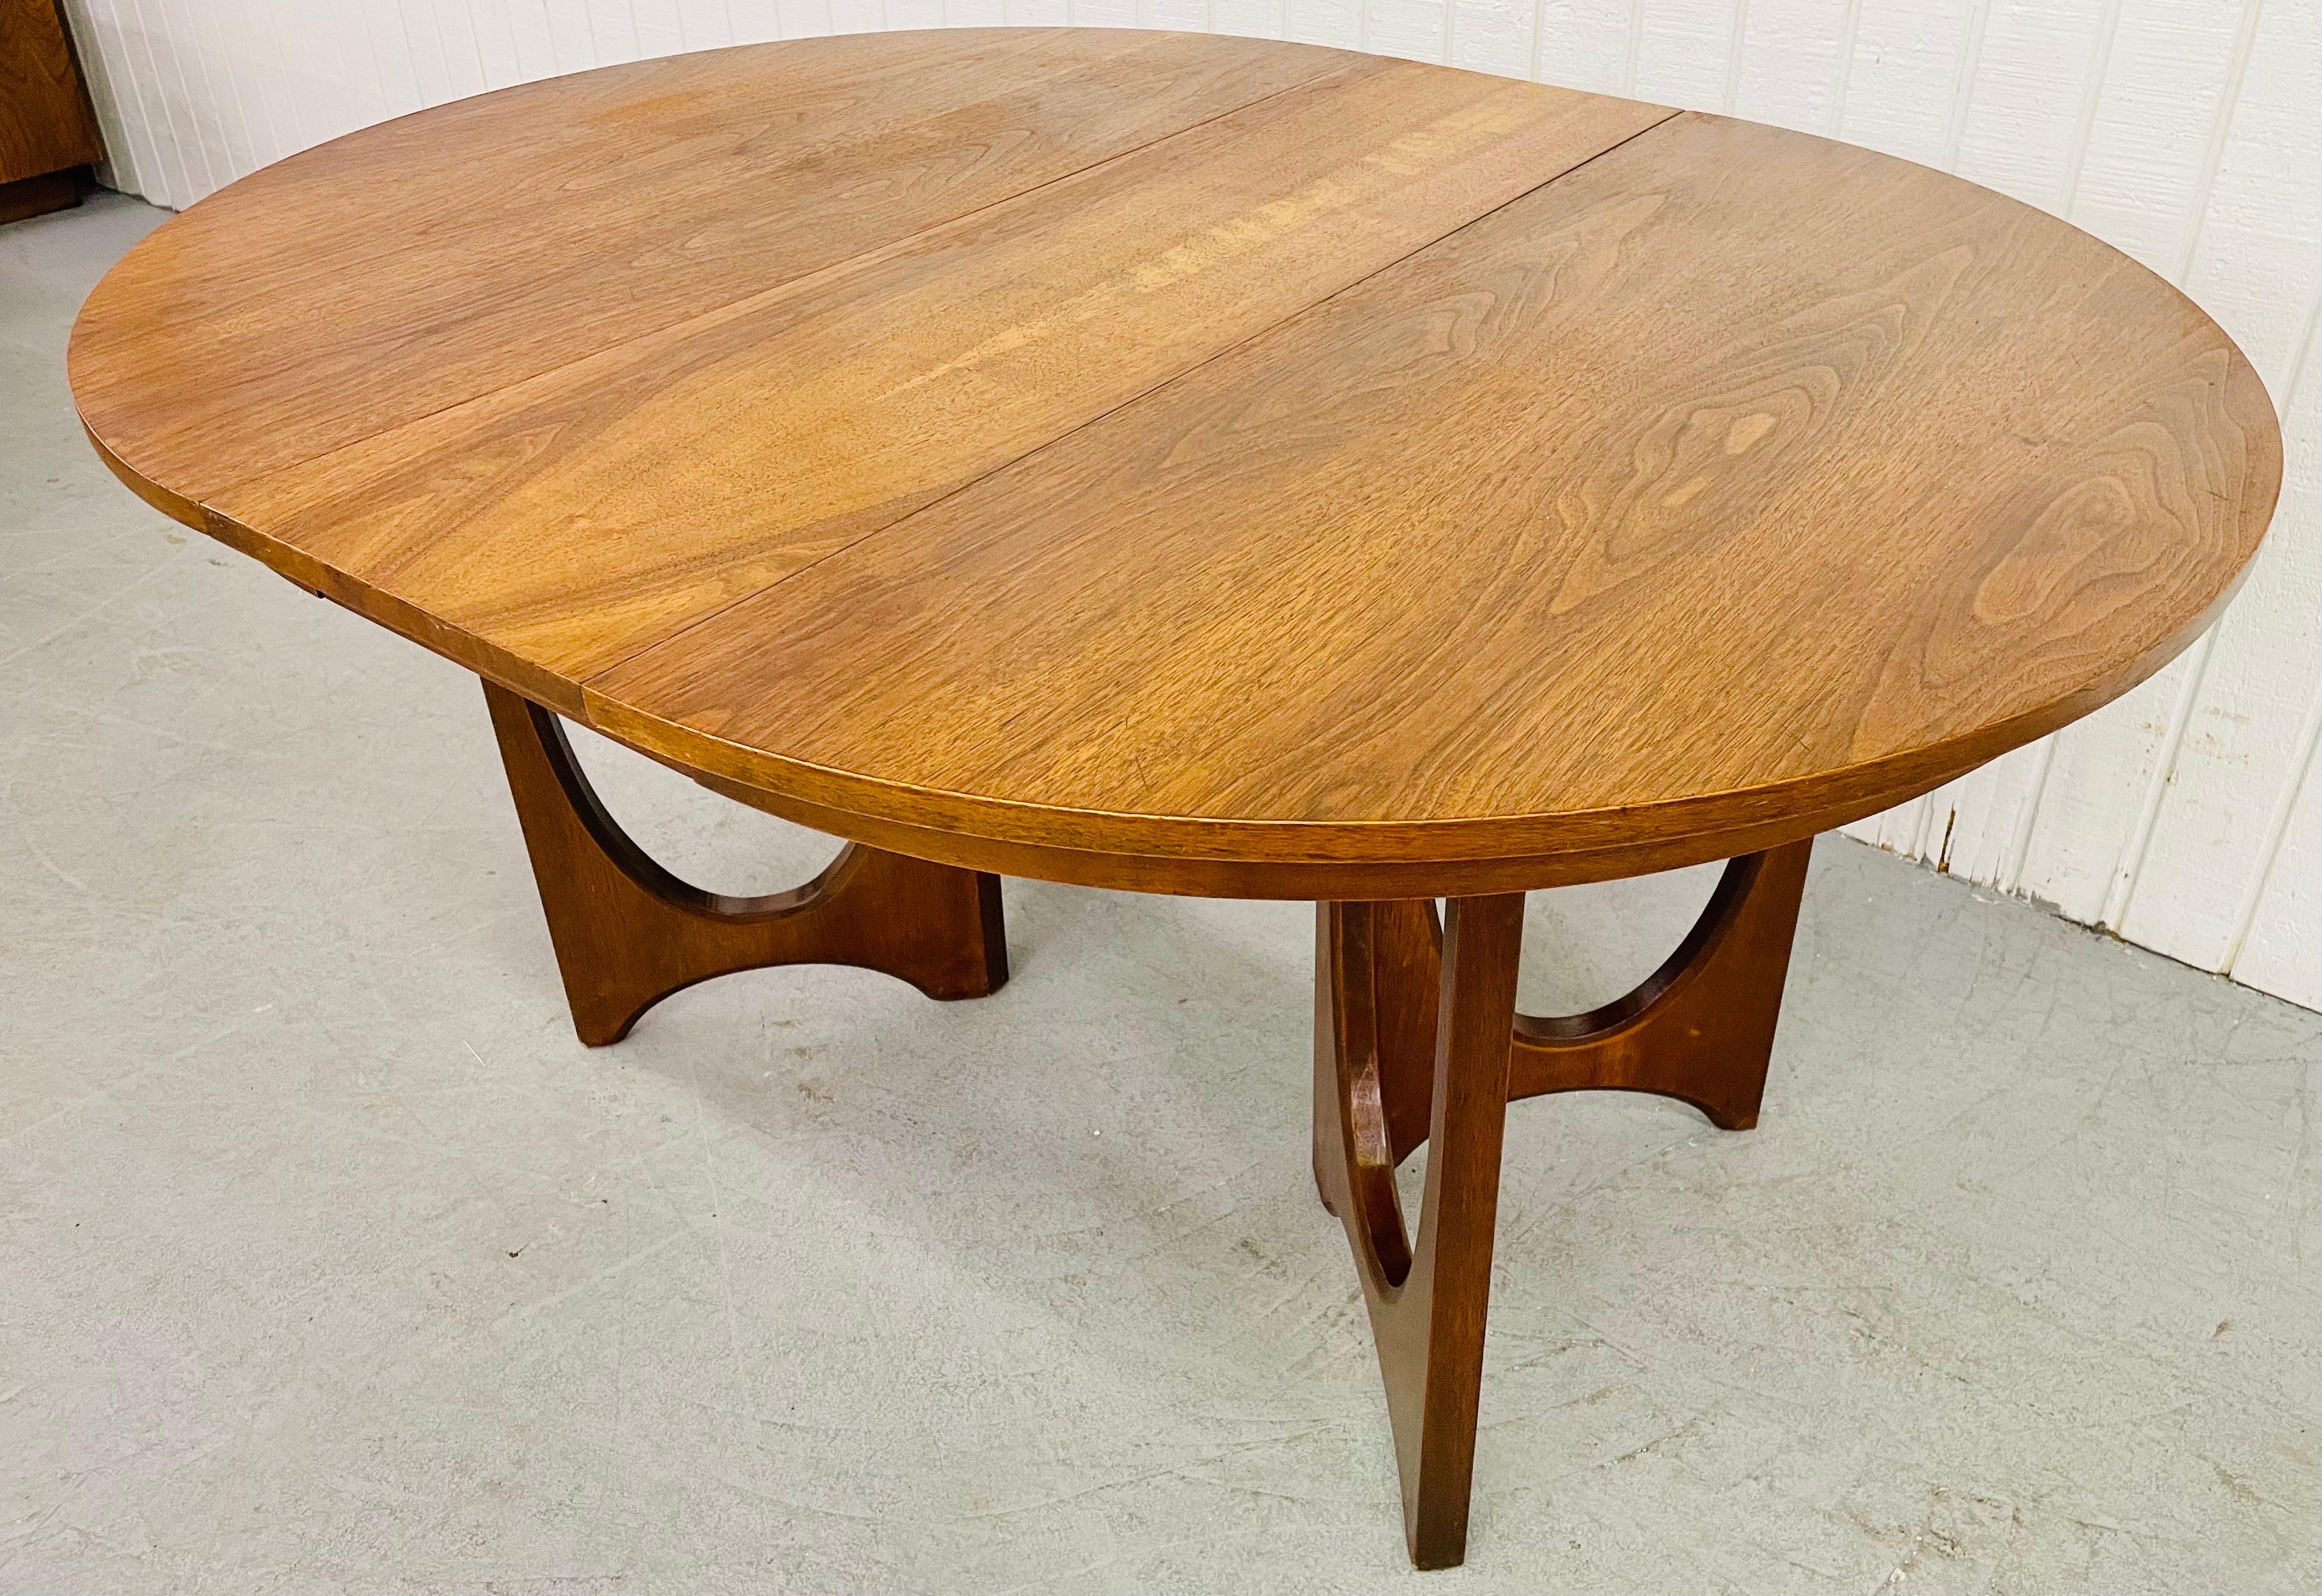 This listing is for a Mid-Century Broyhill Brasilia walnut dining table. Featuring the iconic walnut curved legs, round walnut top, one leaf that extends the table up to 56” L into an oval top, and a beautiful walnut finish.